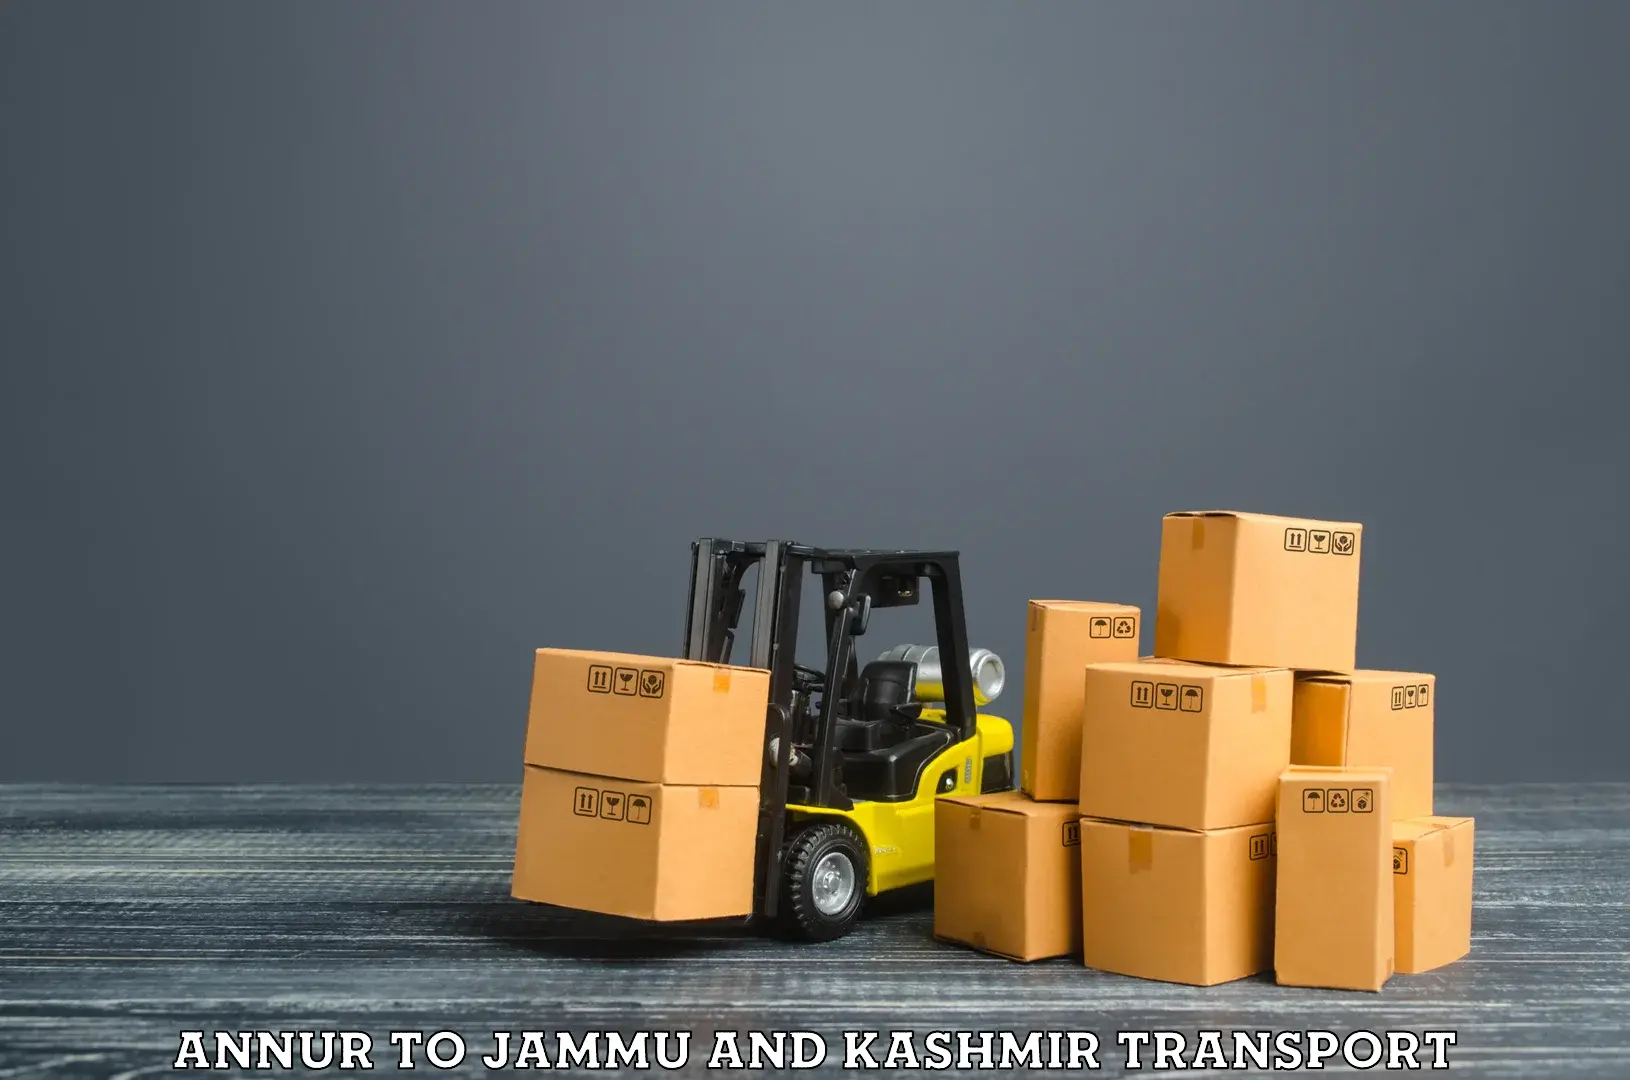 Container transport service Annur to Jammu and Kashmir